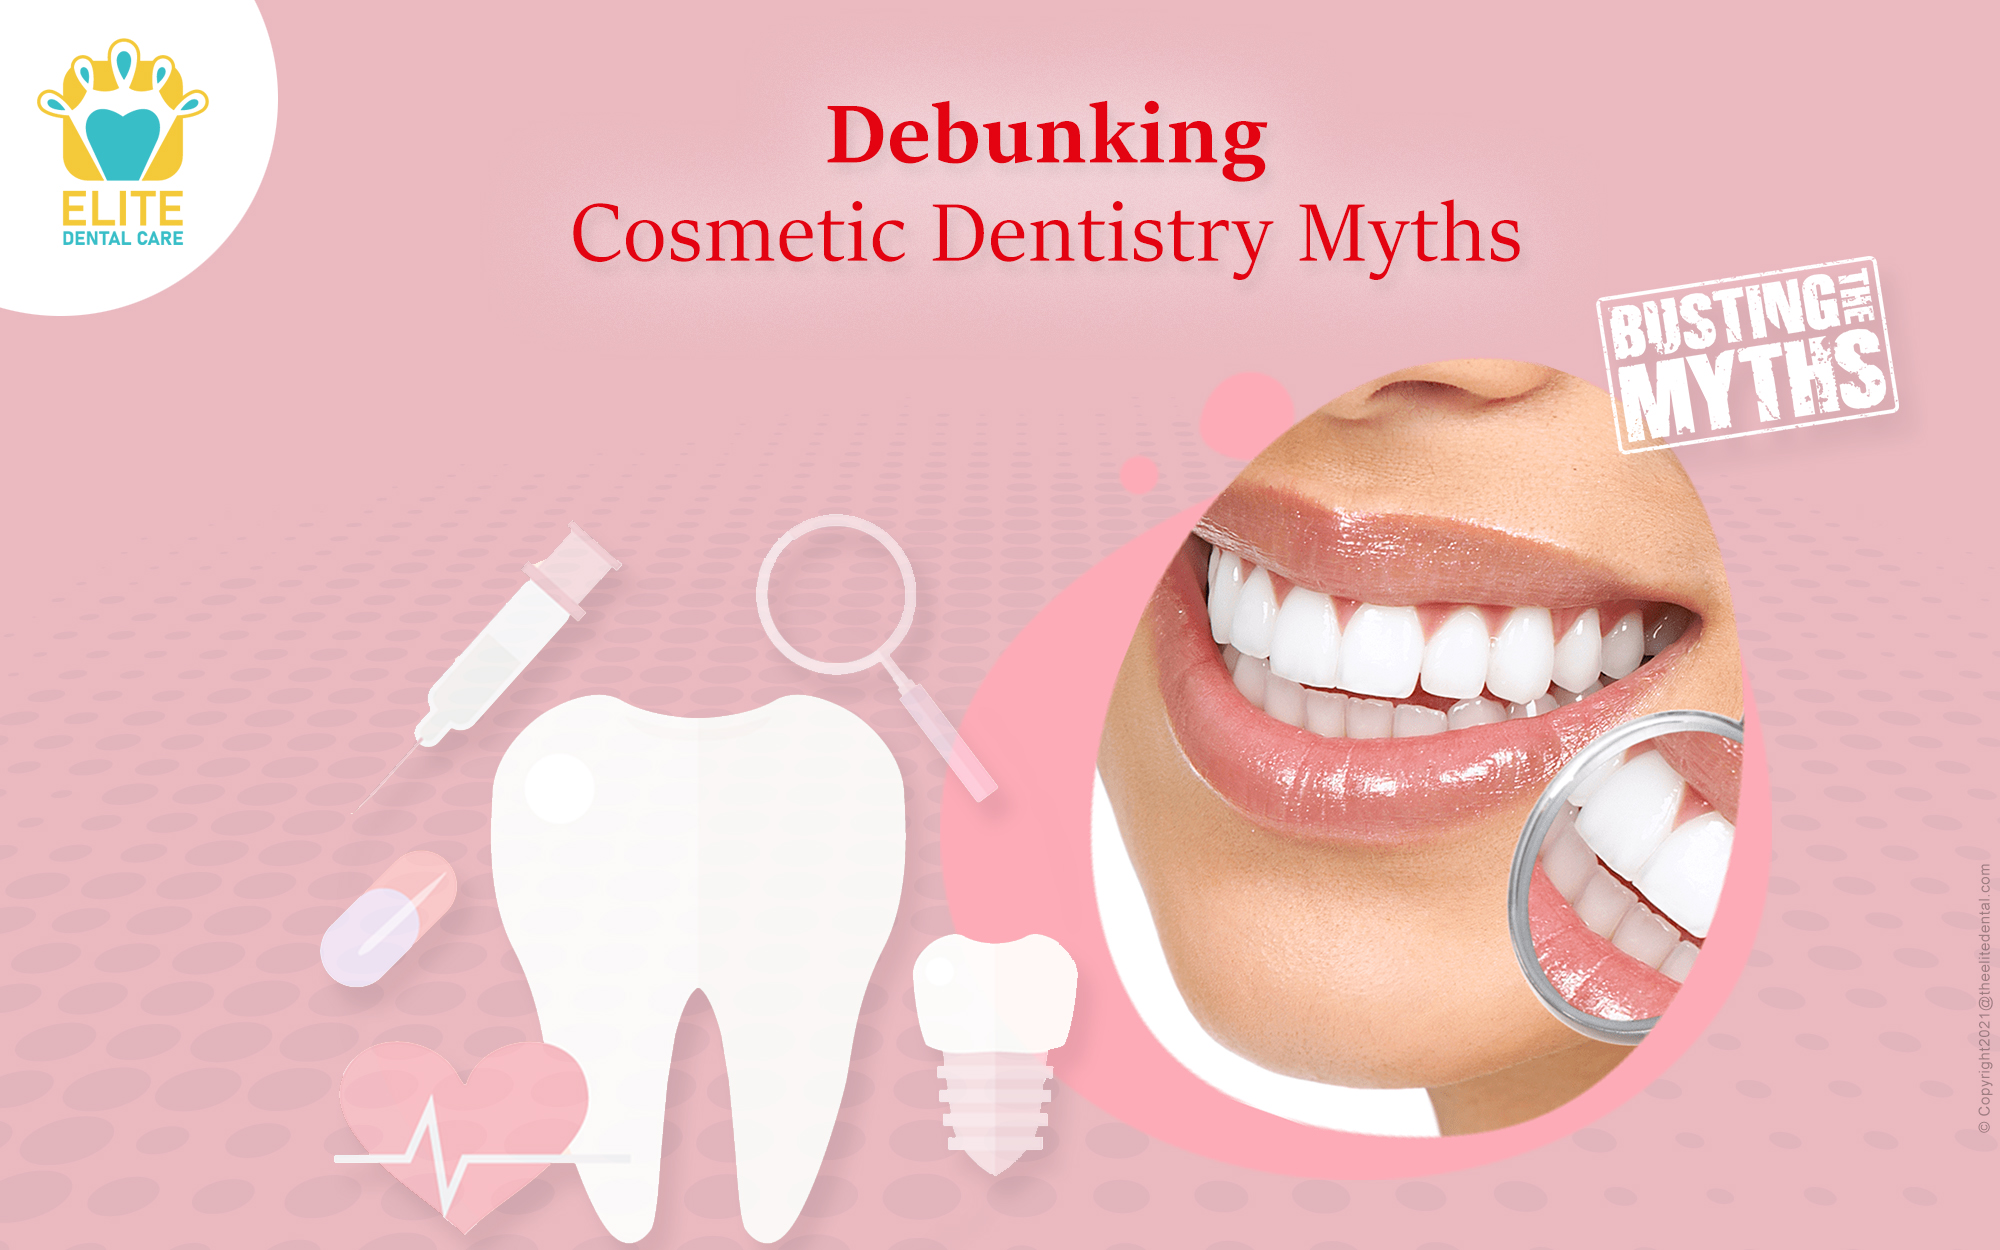 DEBUNKING THE MYTHS ABOUT COSMETIC DENTISTRY